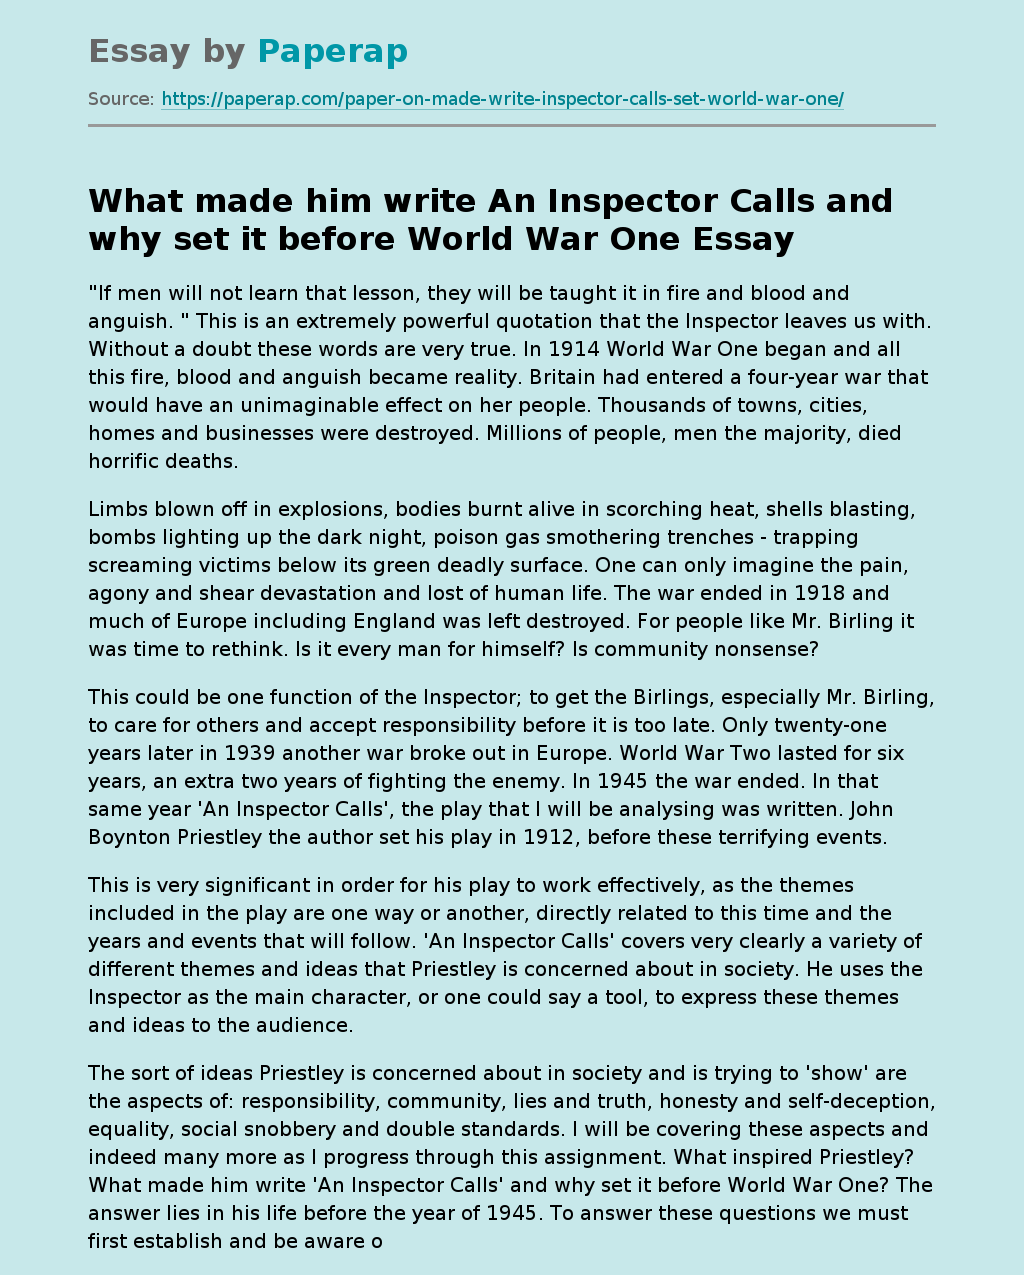 What made him write An Inspector Calls and why set it before World War One